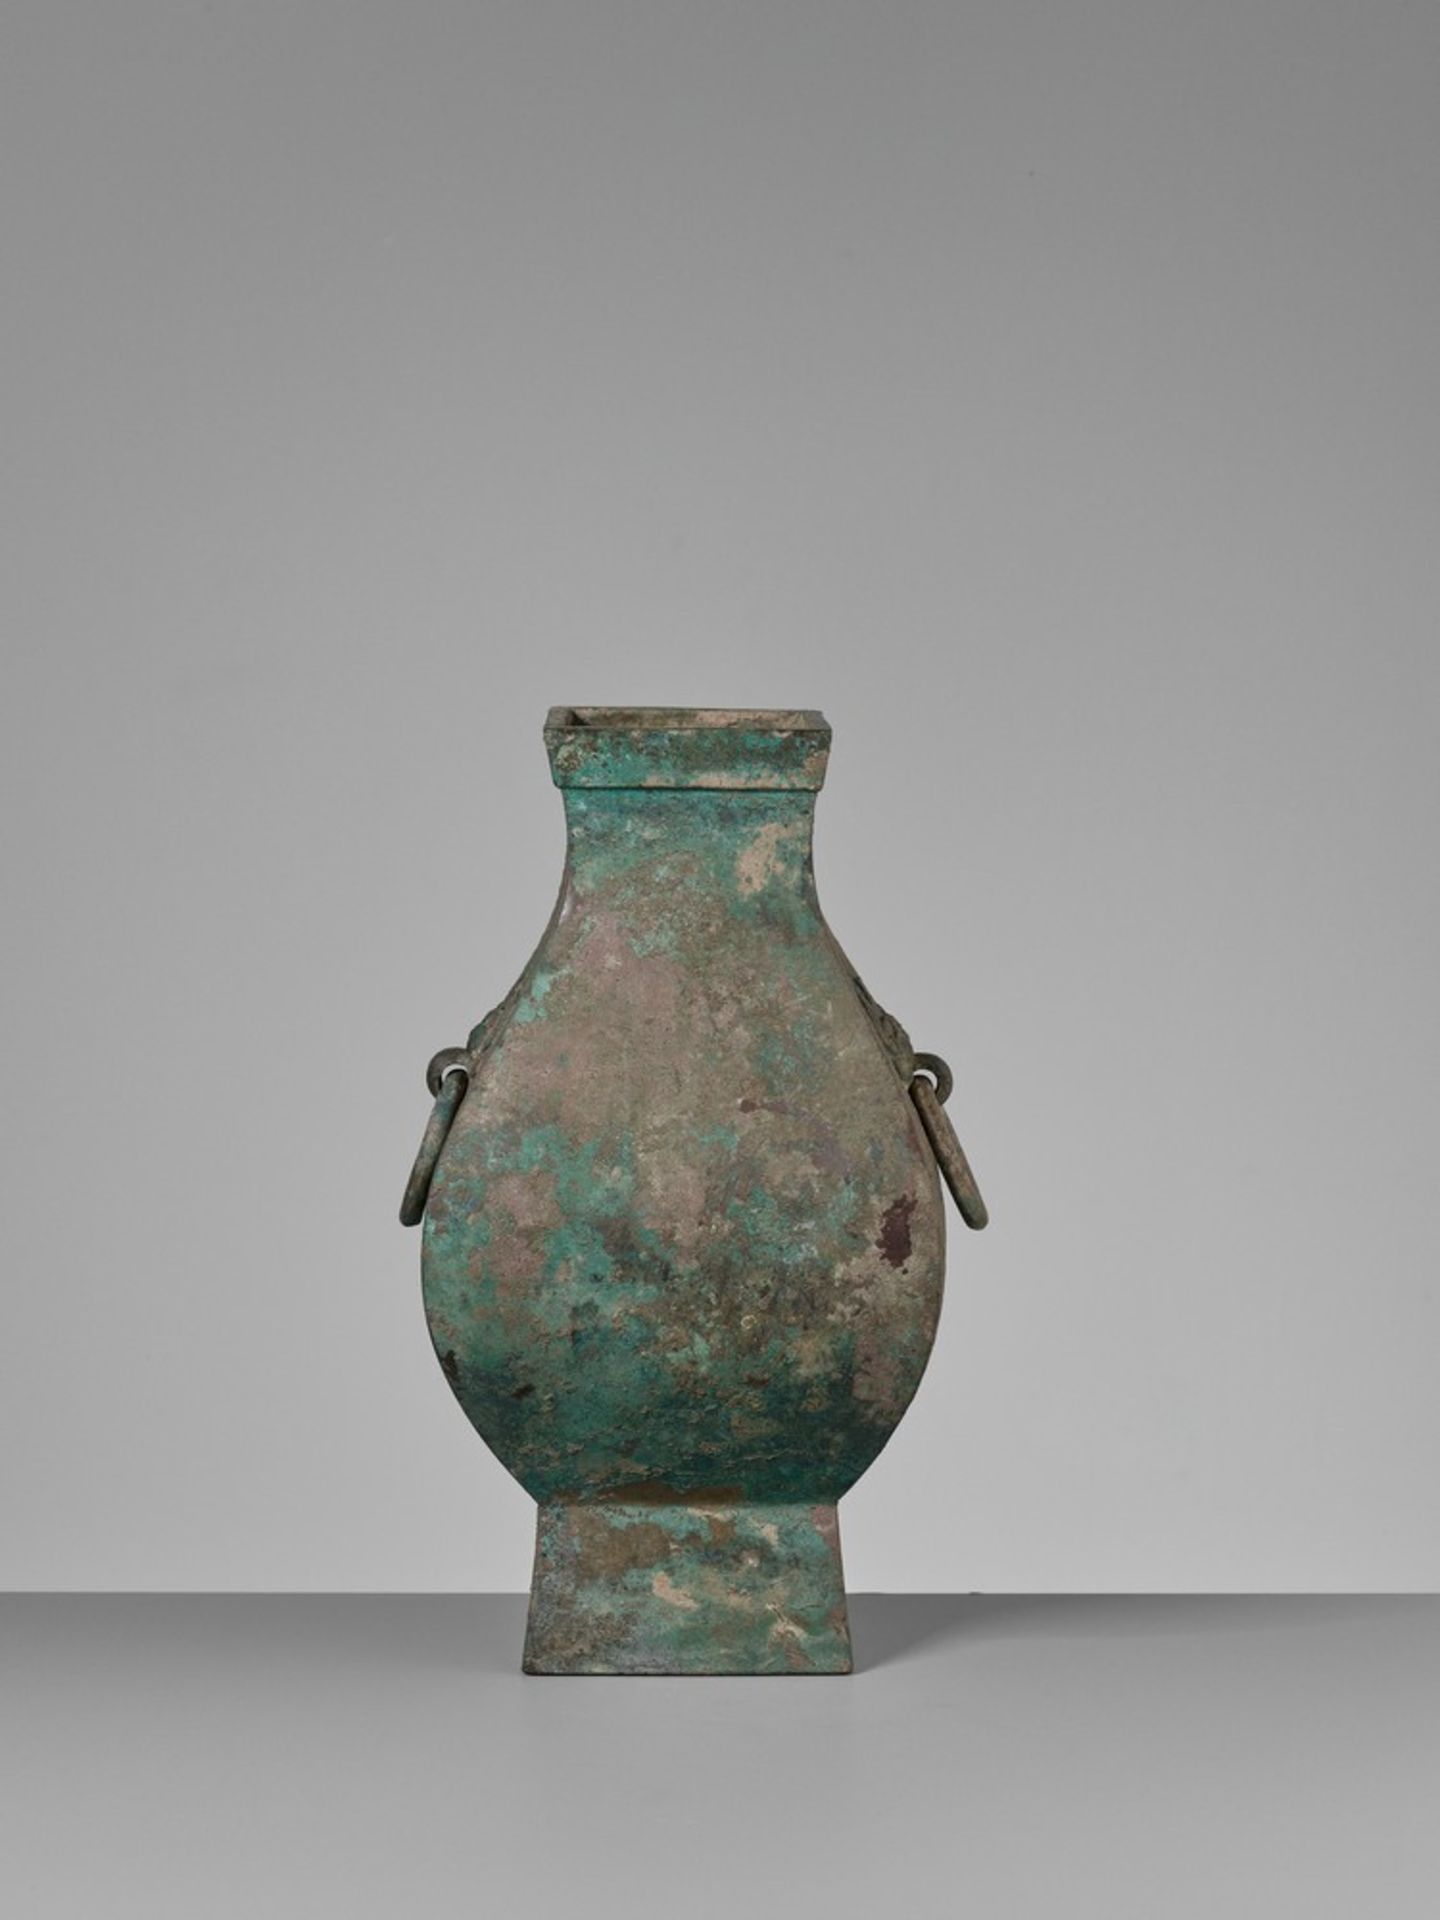 A FACETED BRONZE STORAGE VESSEL, FANGHU, HAN DYNASTY China, 206 BC-AD 220. The faceted pear-shaped - Image 11 of 20